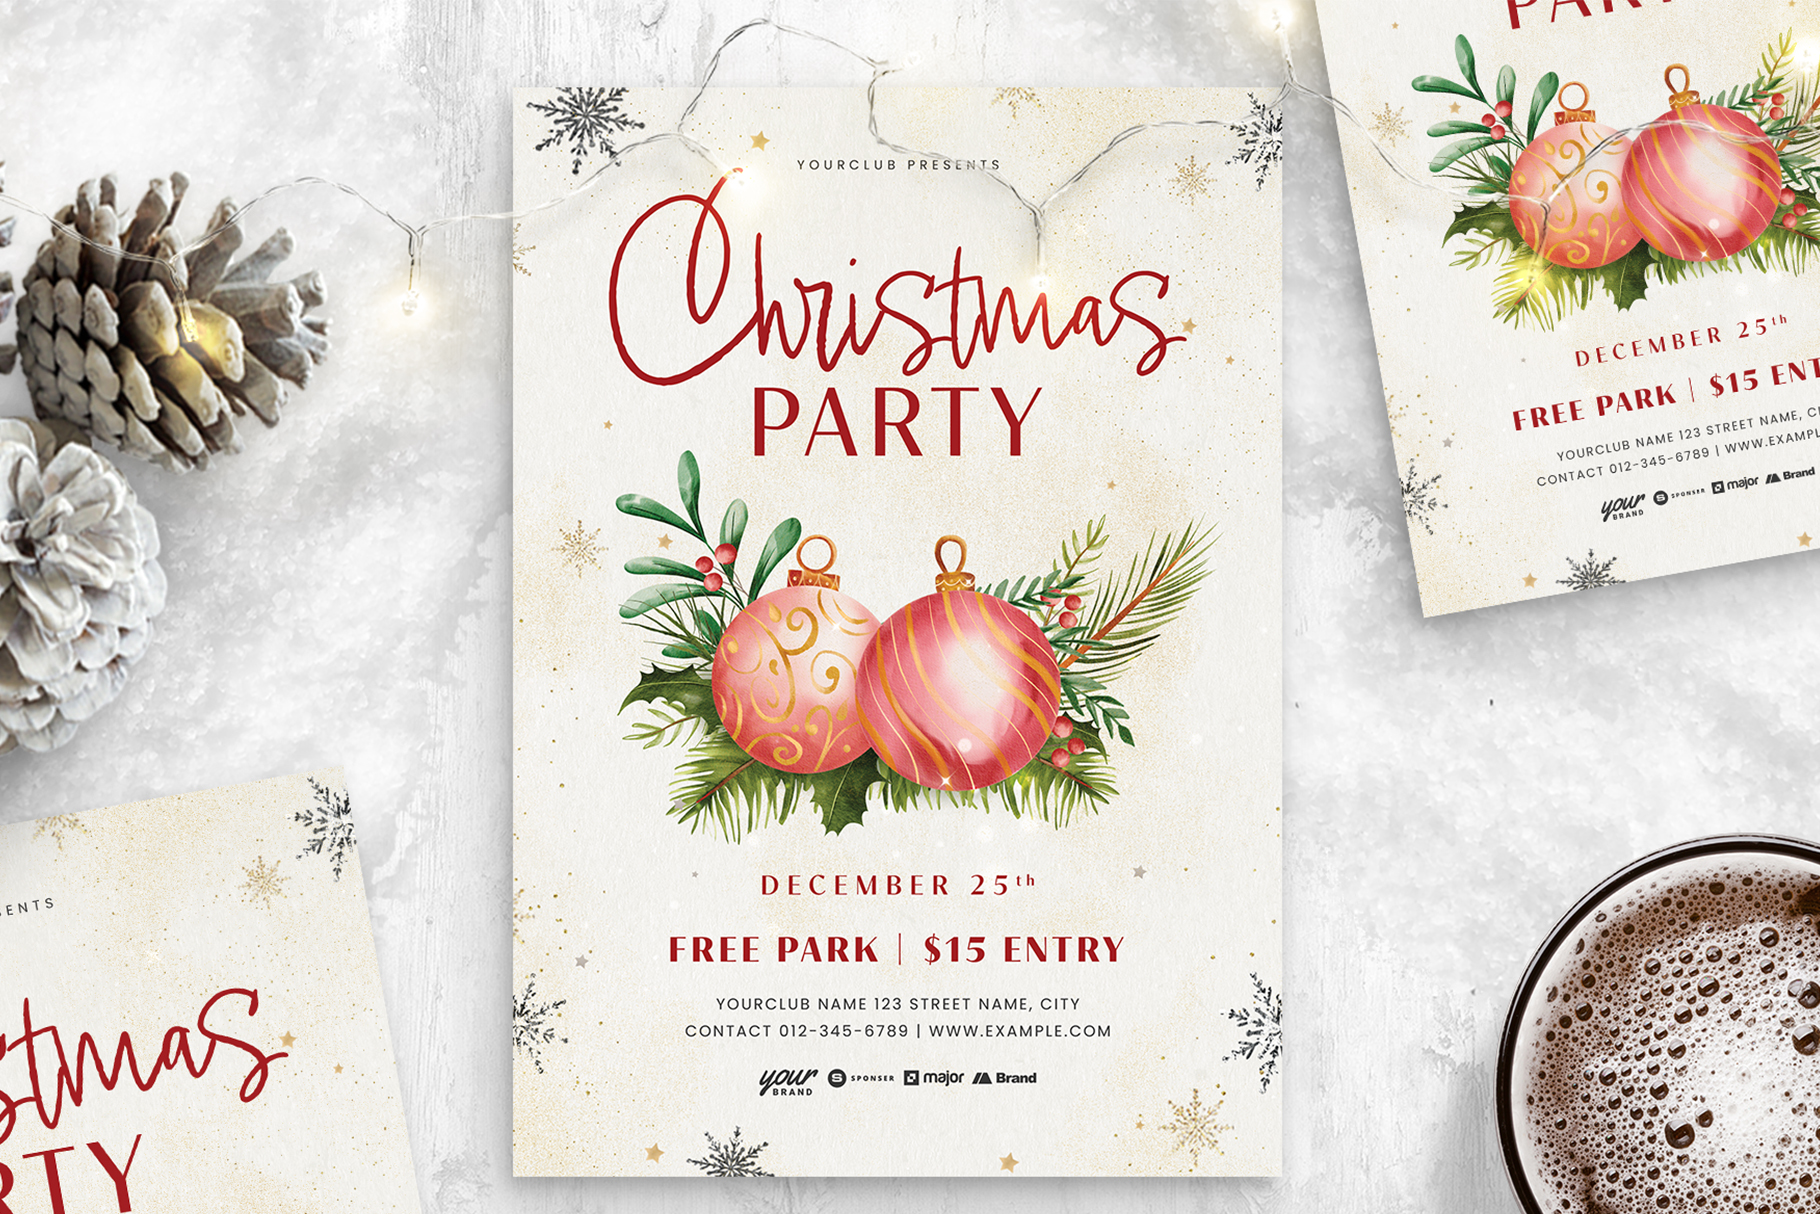 Festive Christmas Party Template (PSD Format)